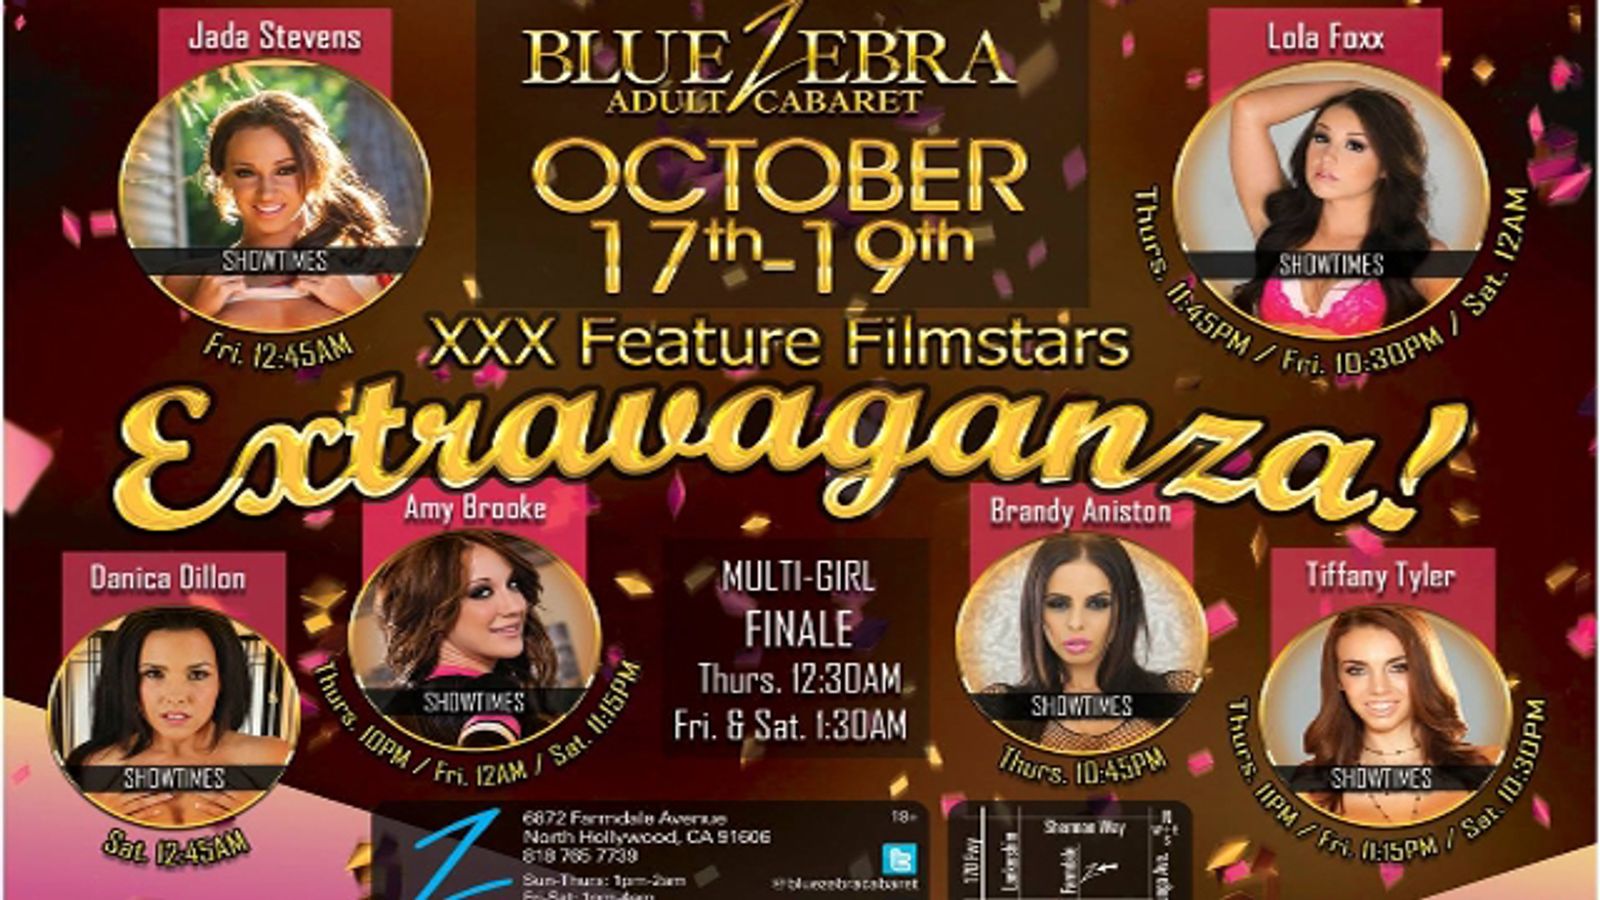 Danica Dillon to Appear at Blue Zebra in North Hollywood October 17